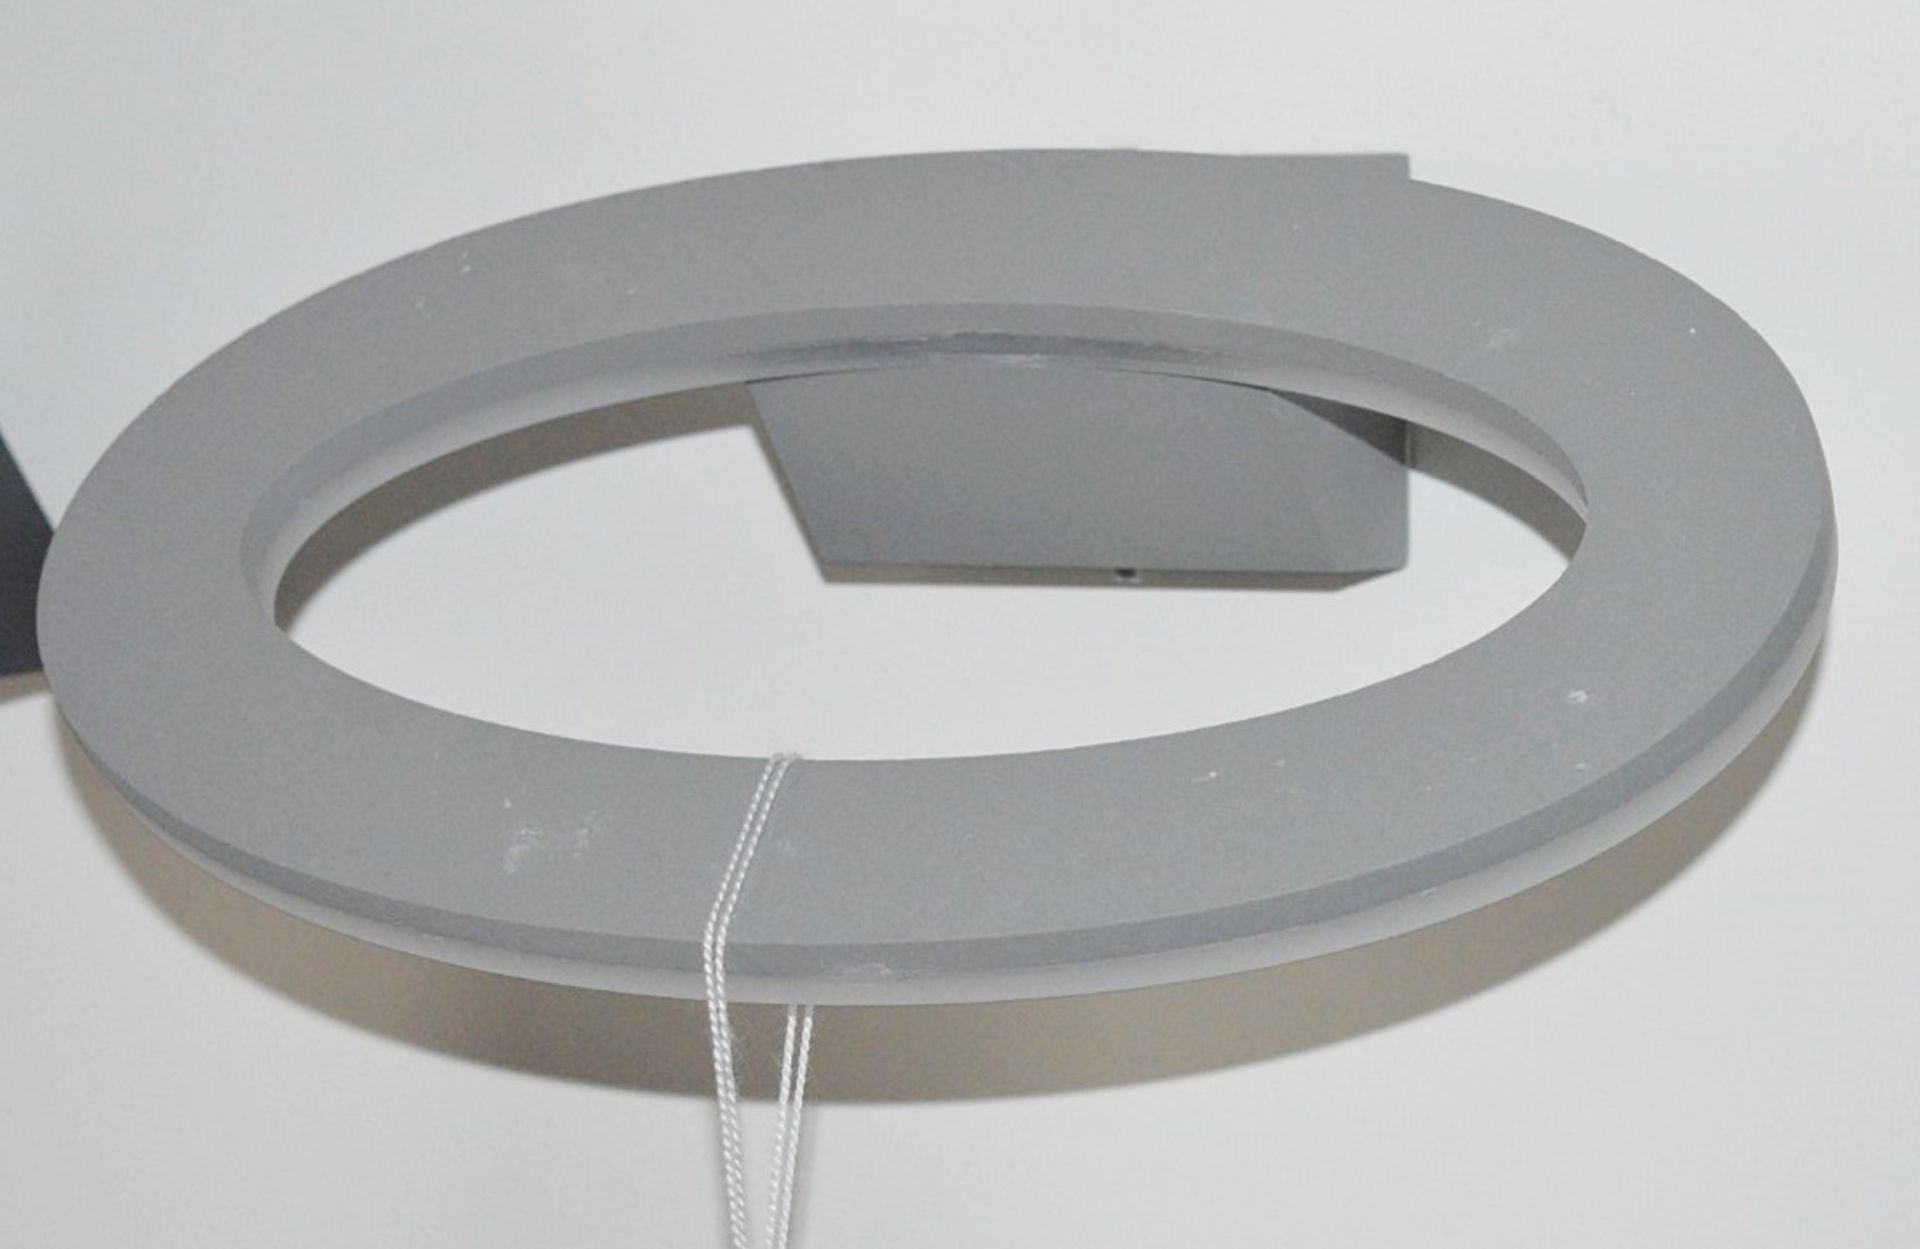 1 x LED Halo Oval Die Cast Aluminium IP44 Grey Outdoor Wall Light With Frosted Diffuser - RRP £72.00 - Image 2 of 3